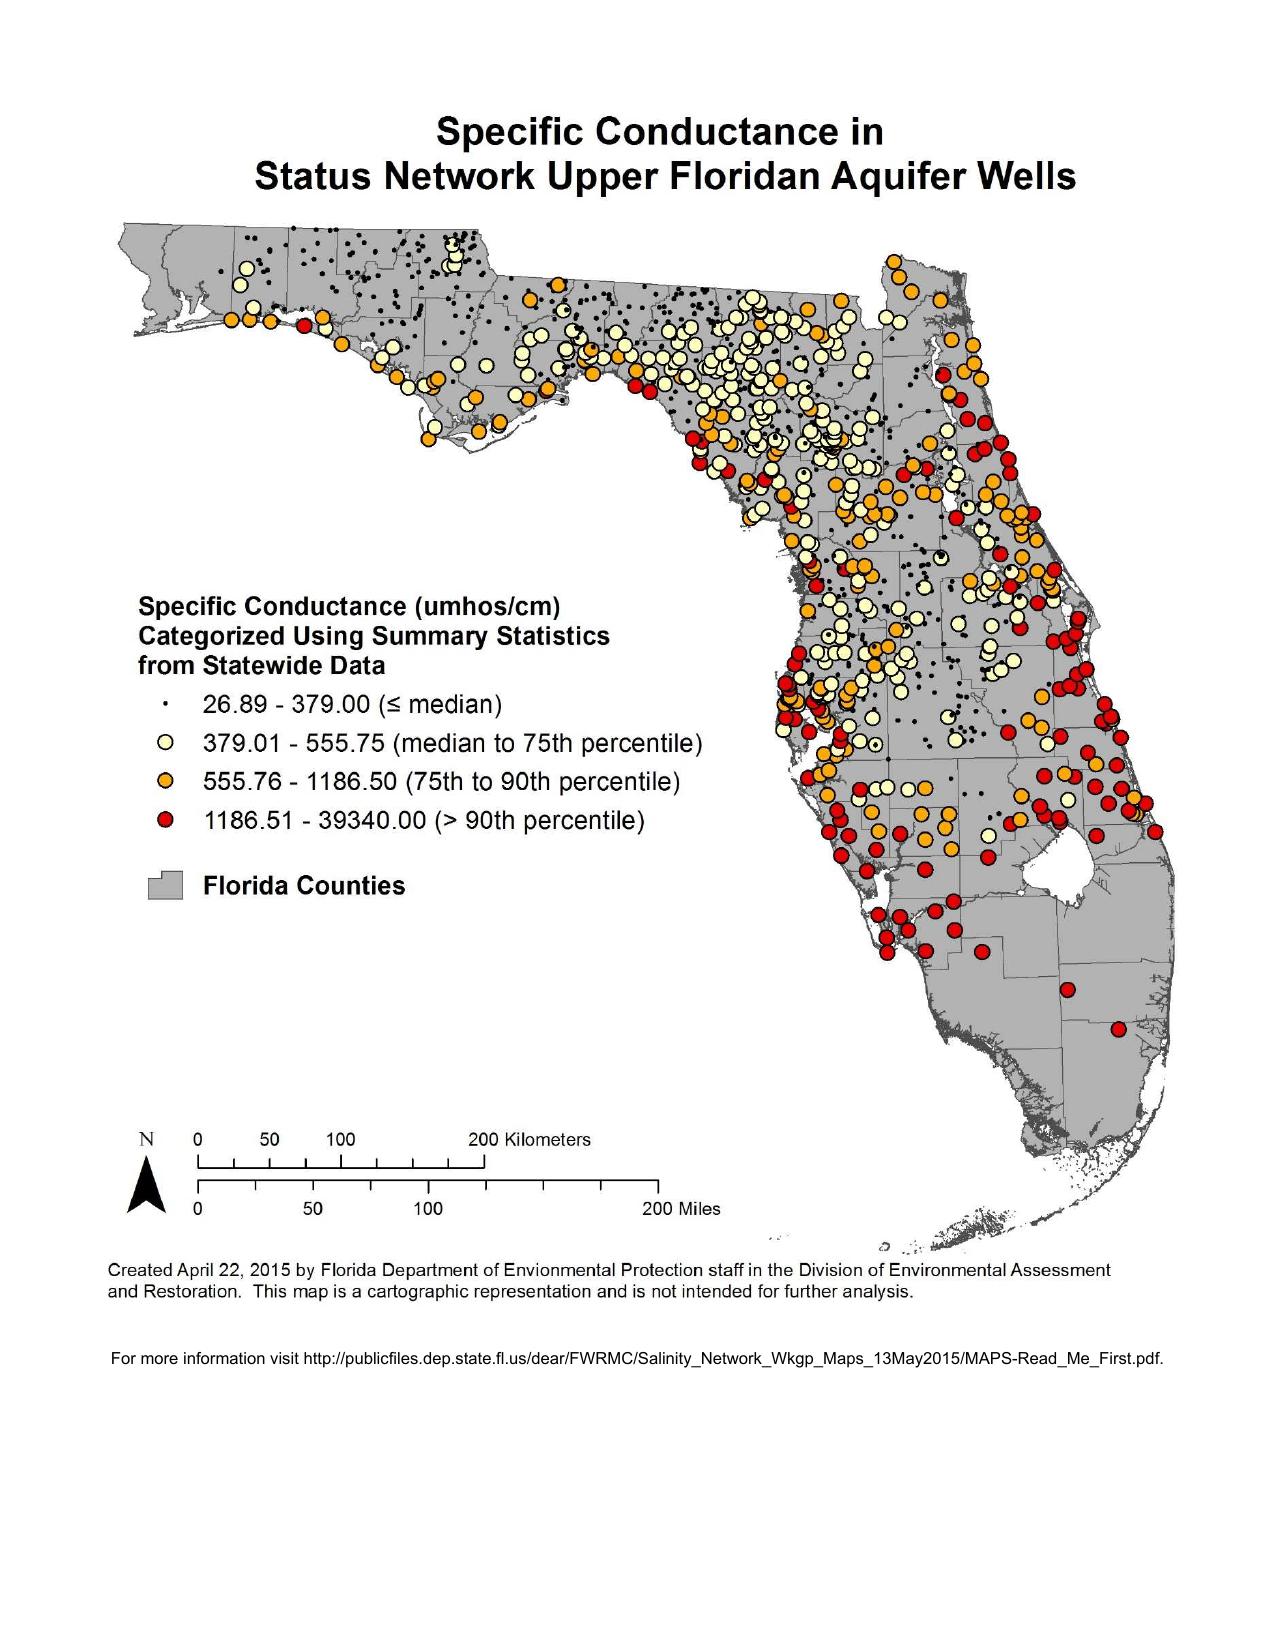 1275x1650 Specific Conductance in Status Network Upper Floridan Aquifer Wells, in Florida Well Salinity Study, by FL-DEP, 13 July 2015